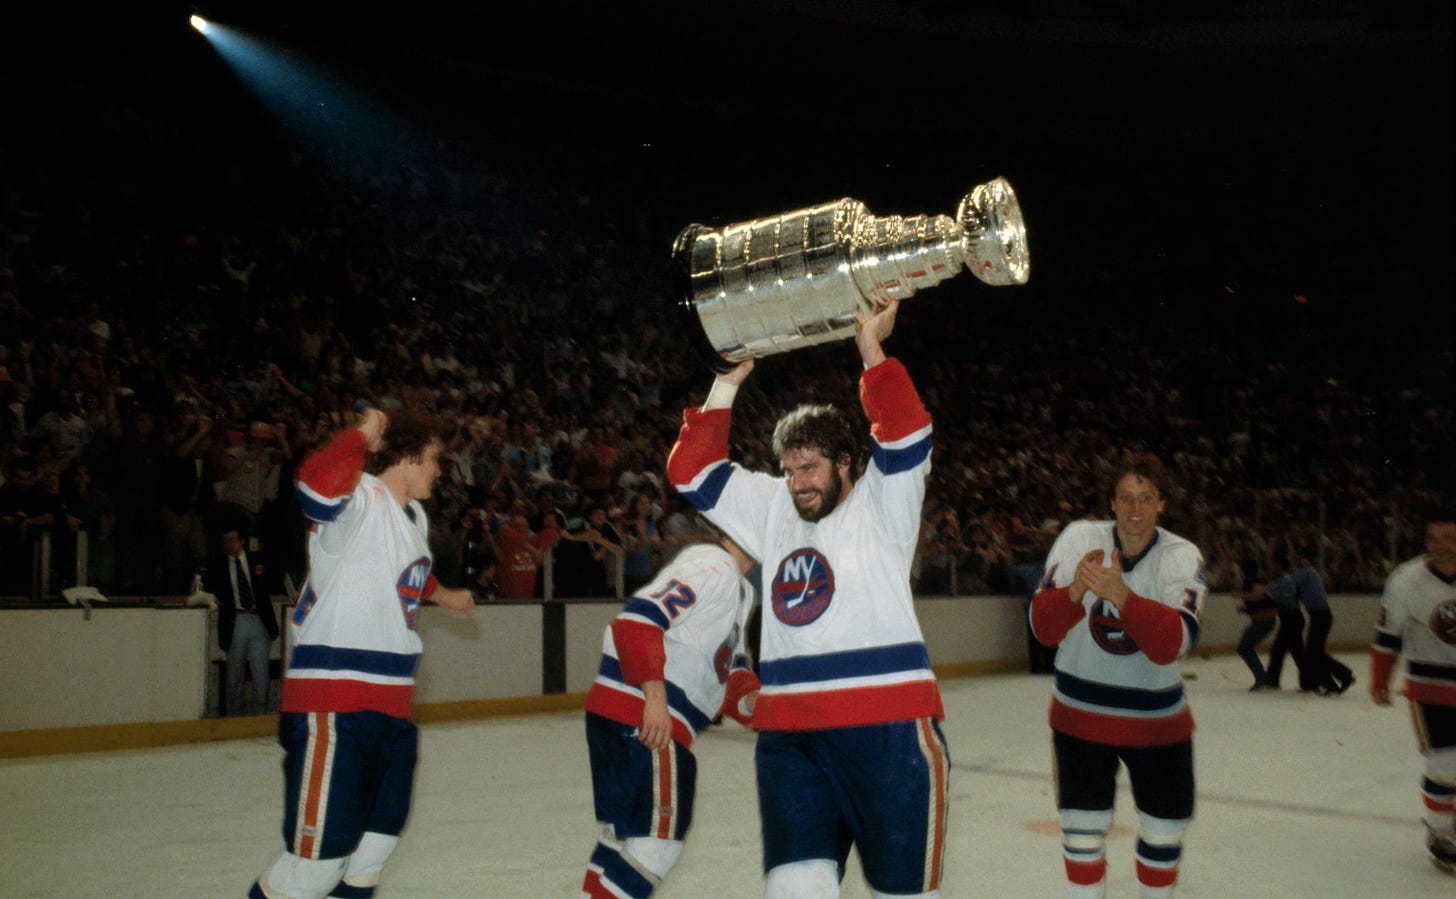 25 most insane things people have ever done with the Stanley Cup - Page 13